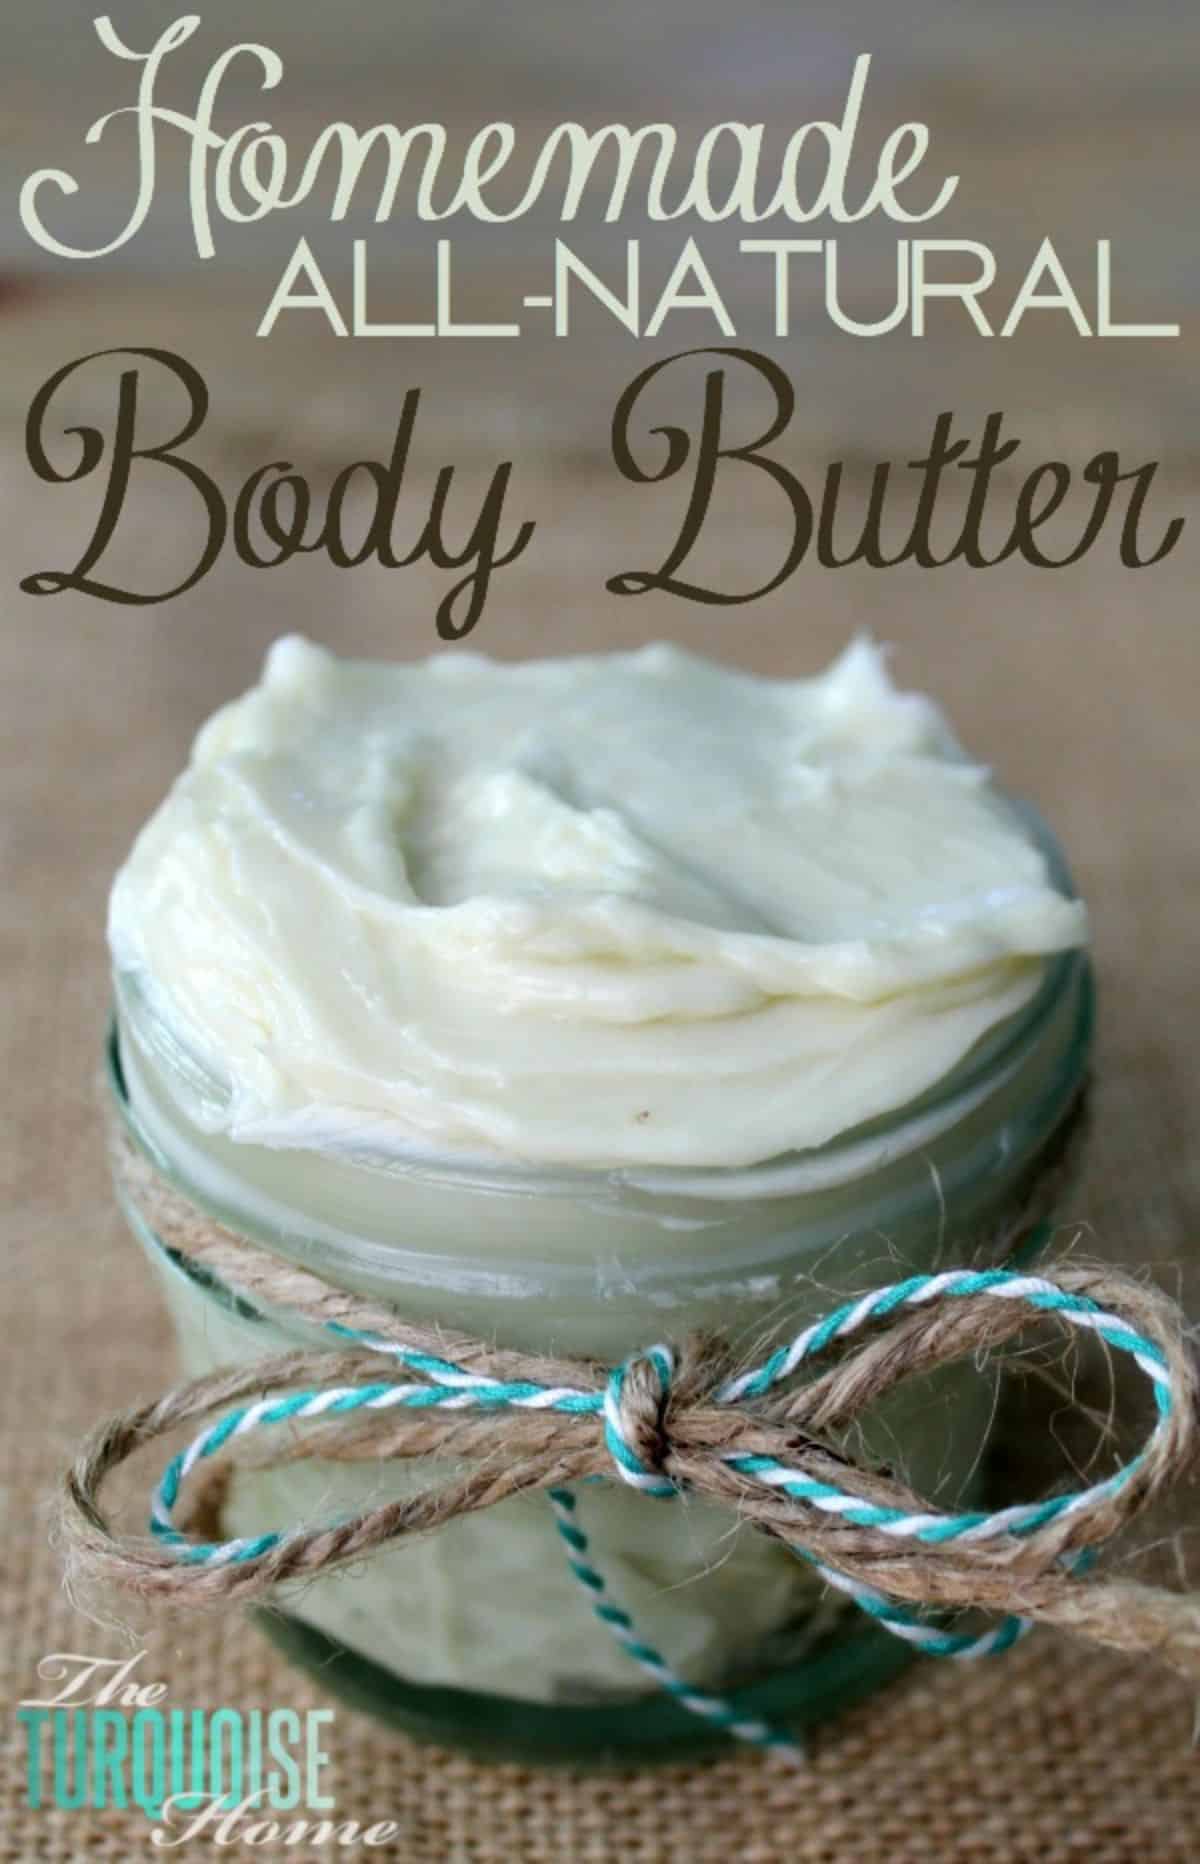 Glass jar with homemade all-natural body butter.